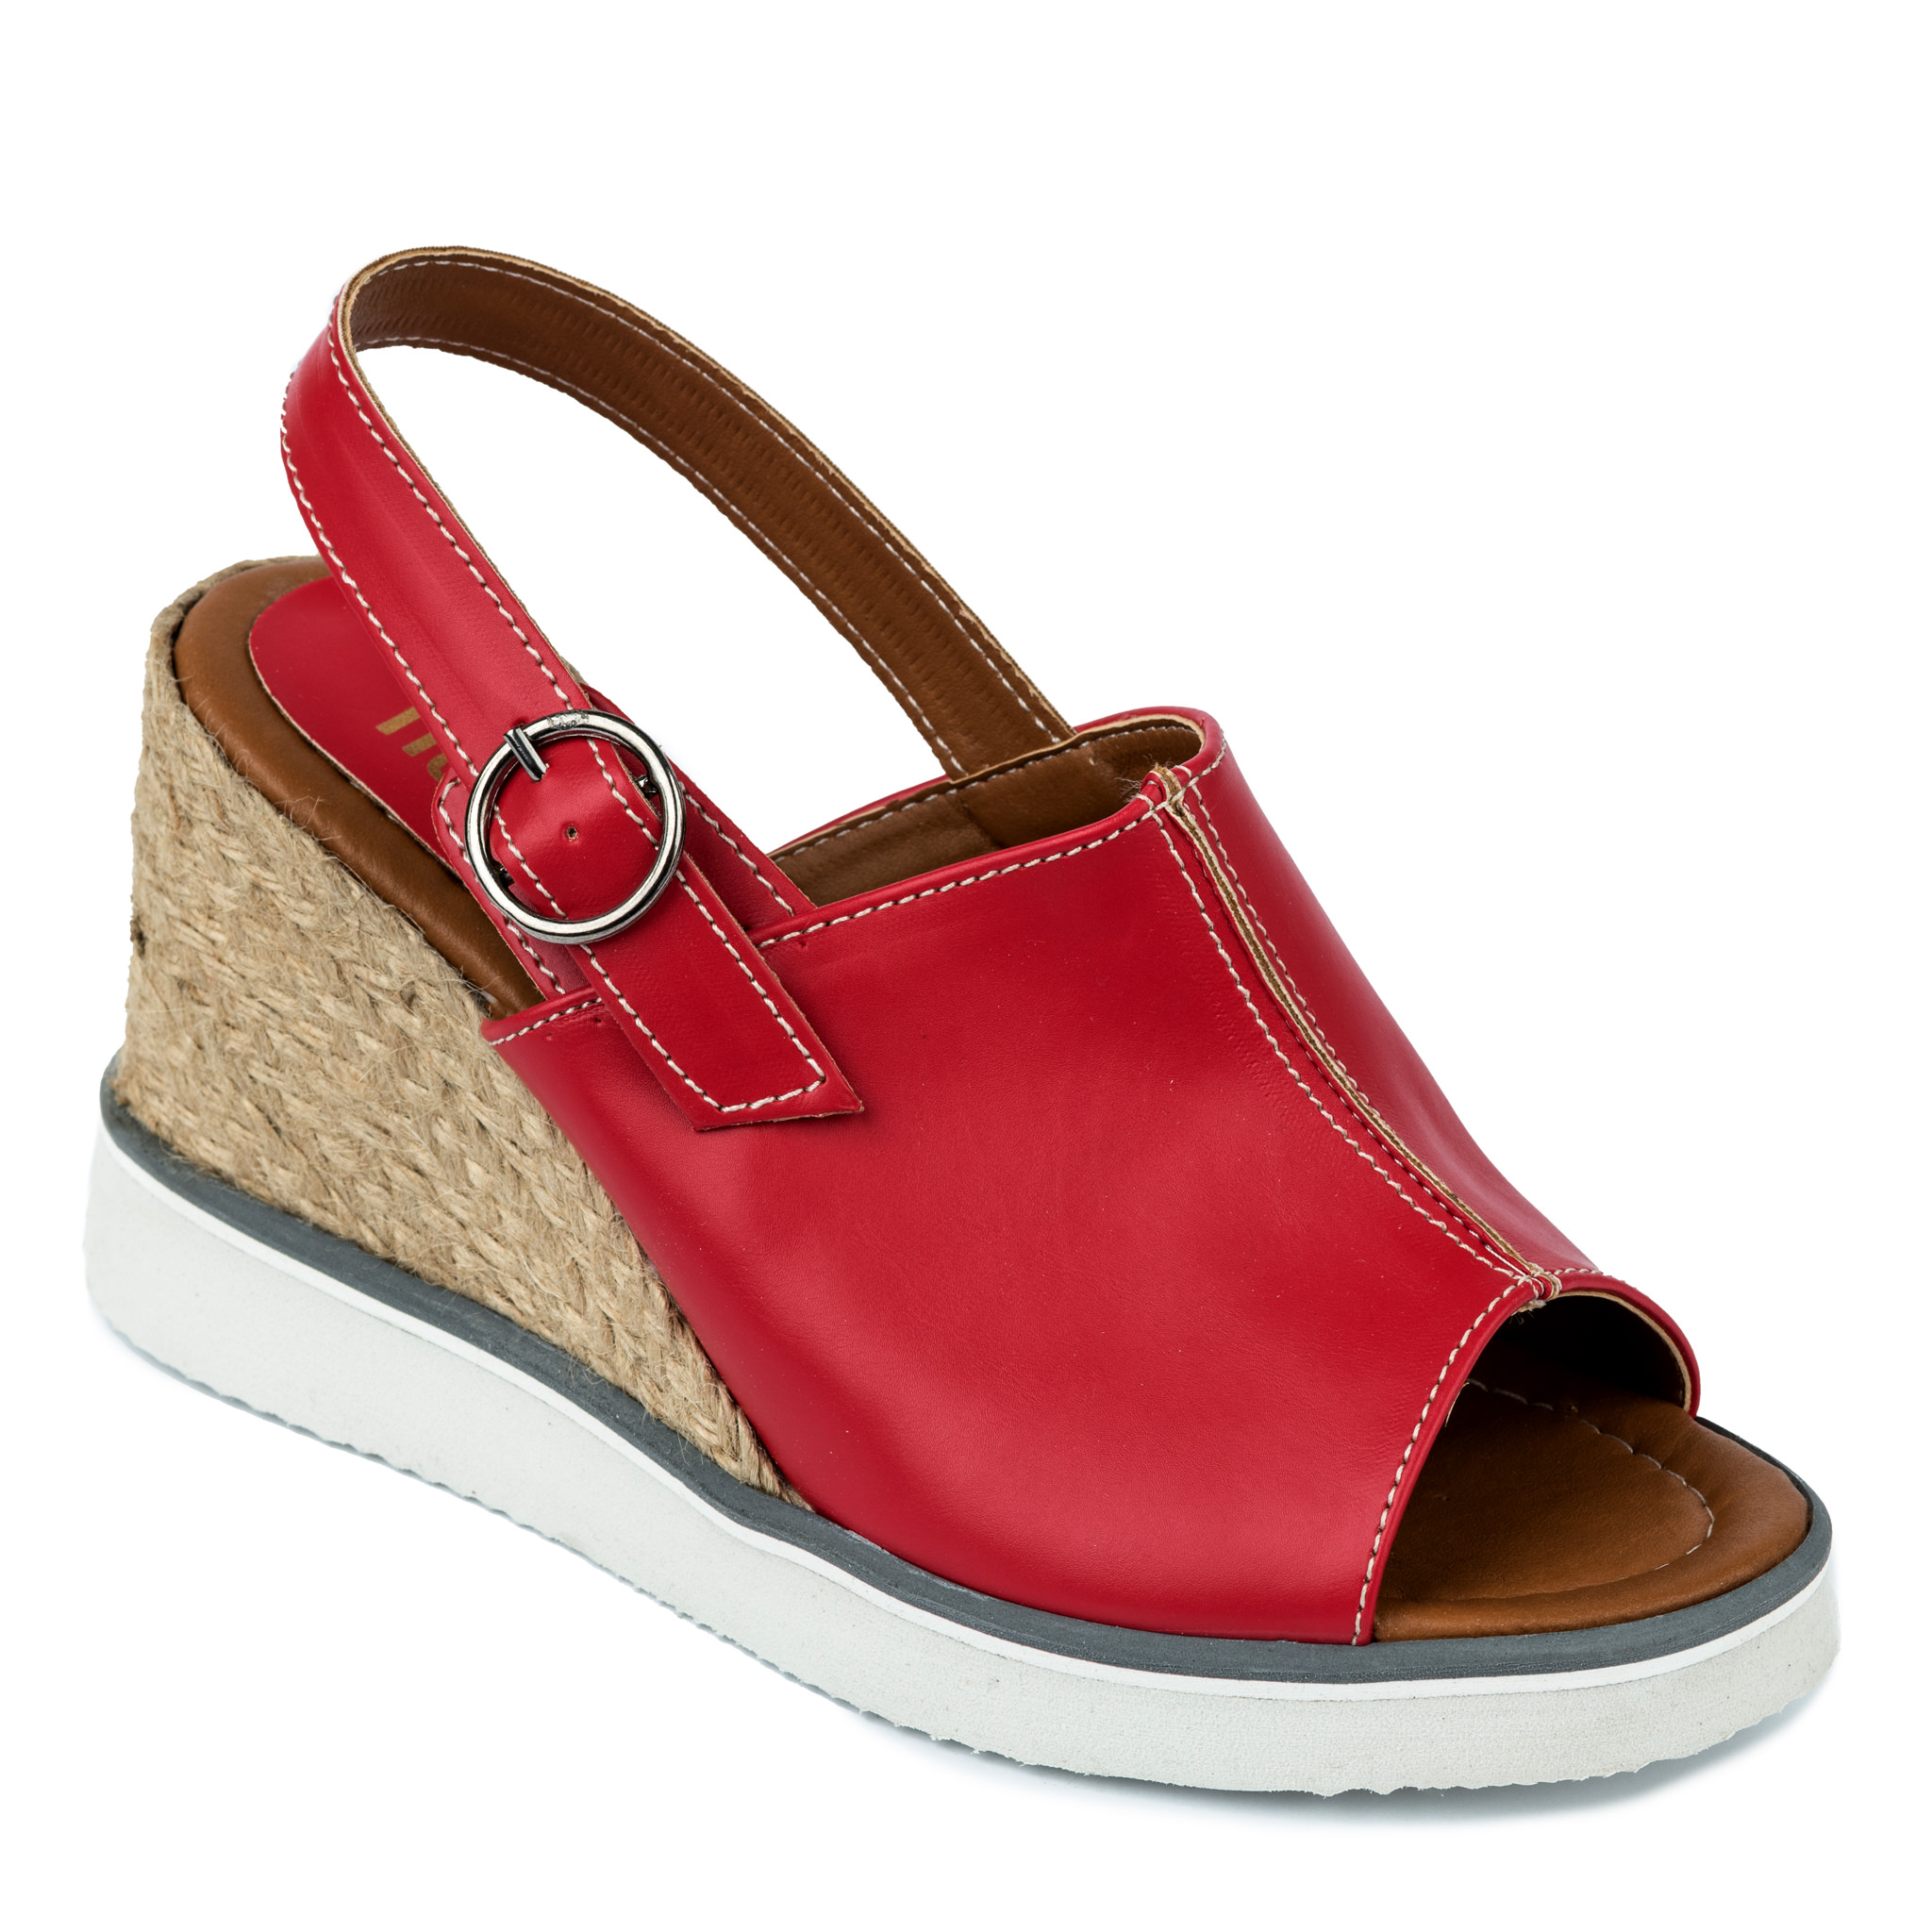 WEDGE SANDALS WITH JUTA AND SAW - RED